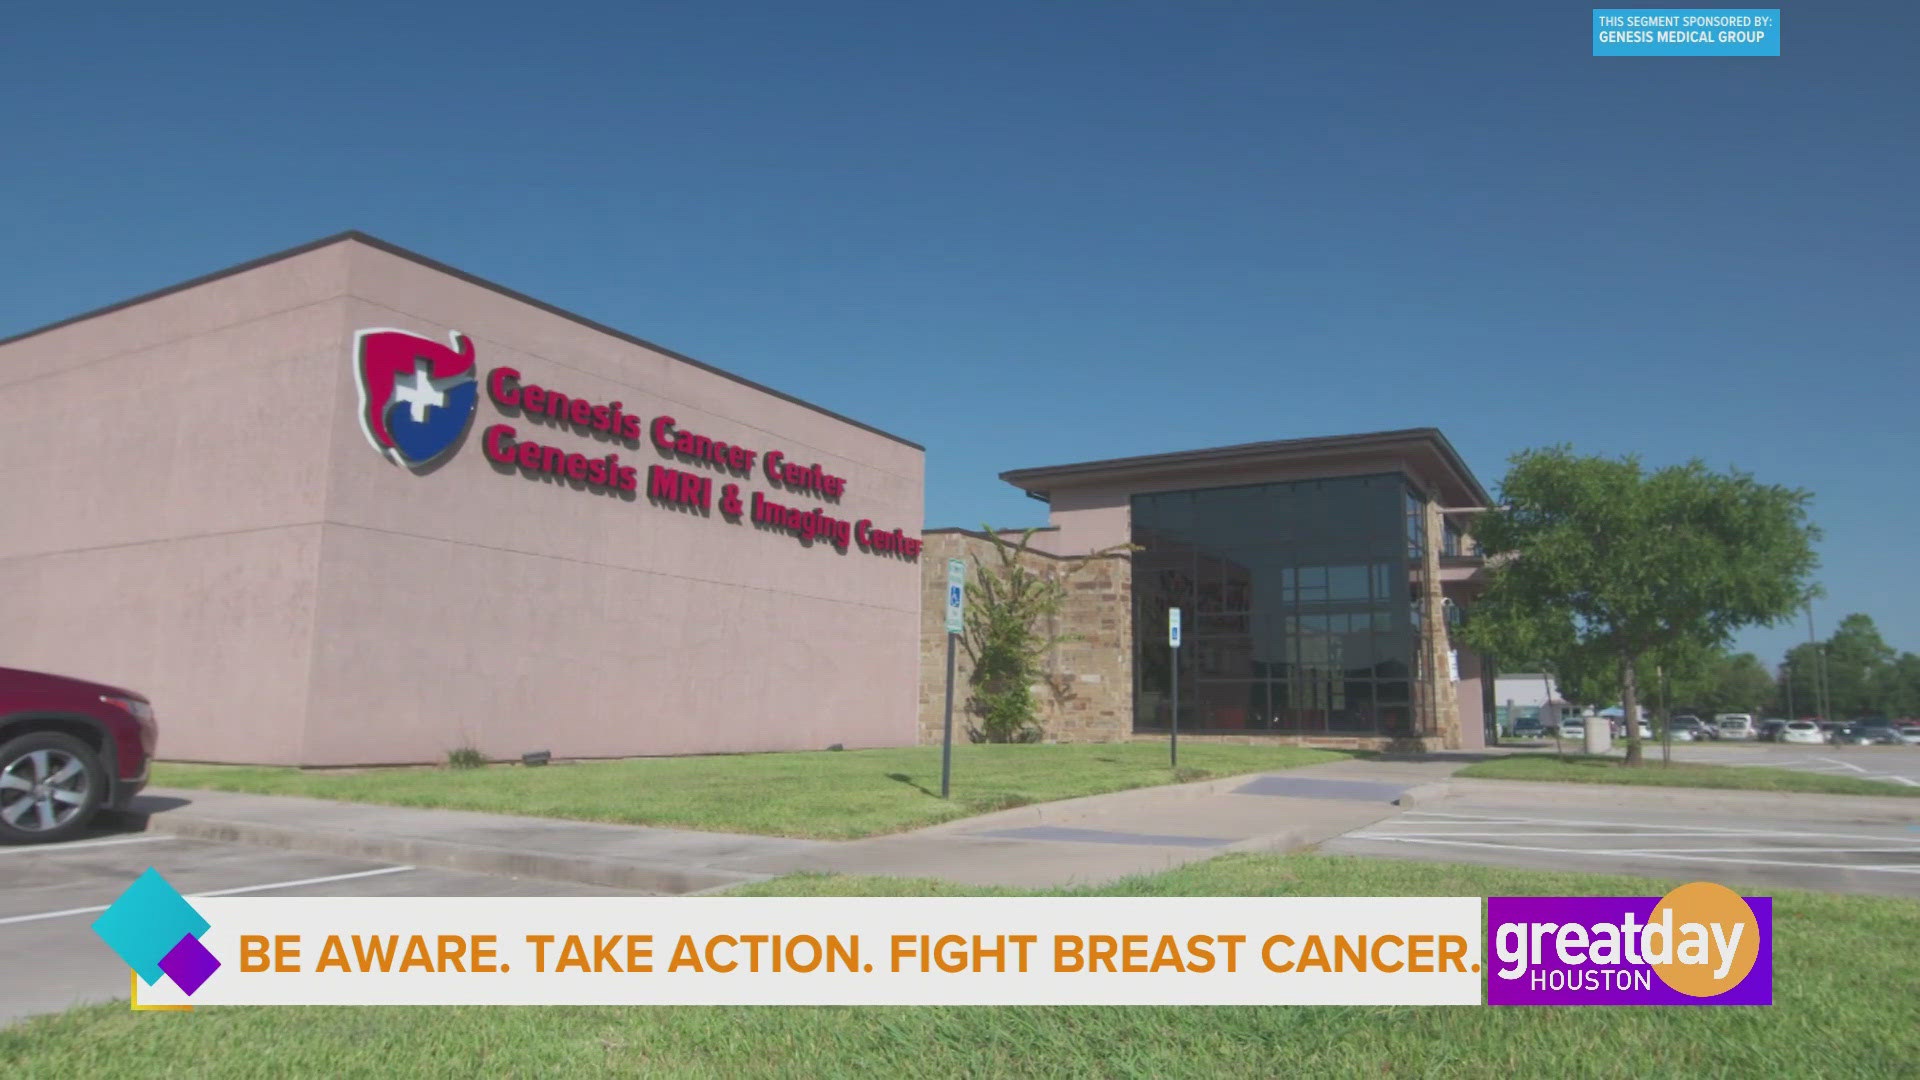 With advances in medical science and continued awareness and support, Genesis Medical Group is working towards reducing the impact of breast cancer on women's lives.